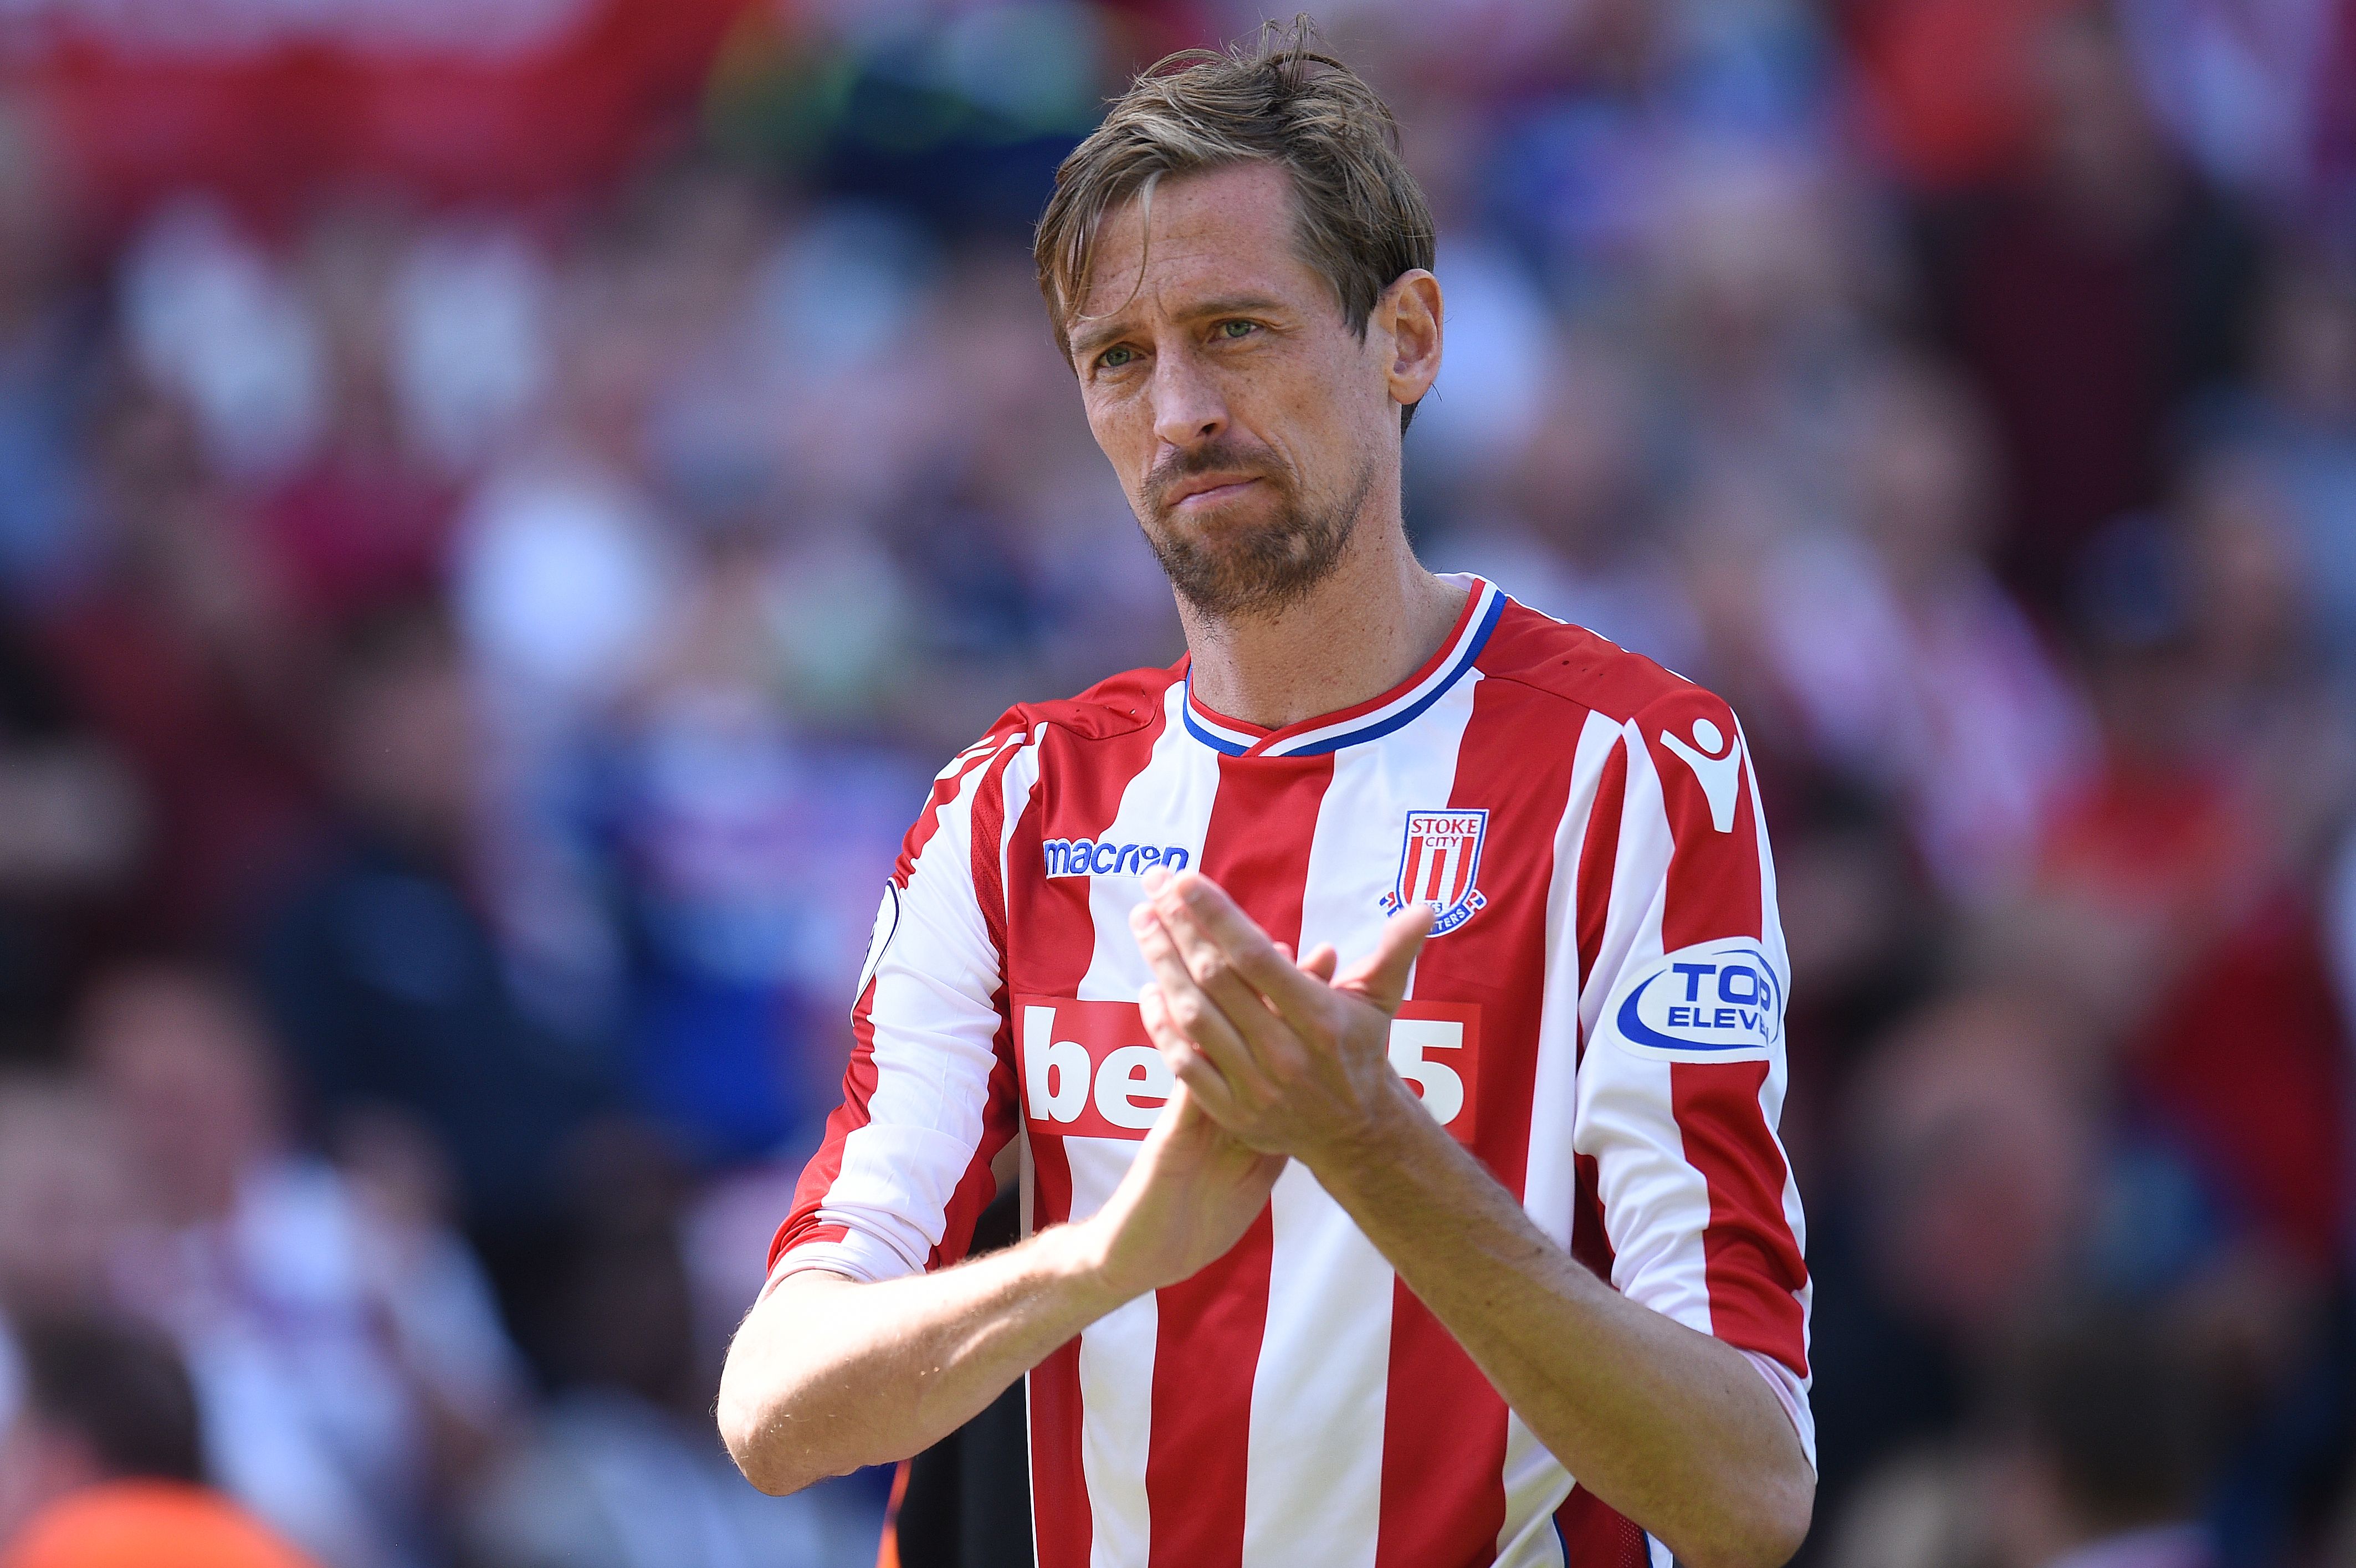 Peter Crouch played for Stoke City between 2011 and 2019.